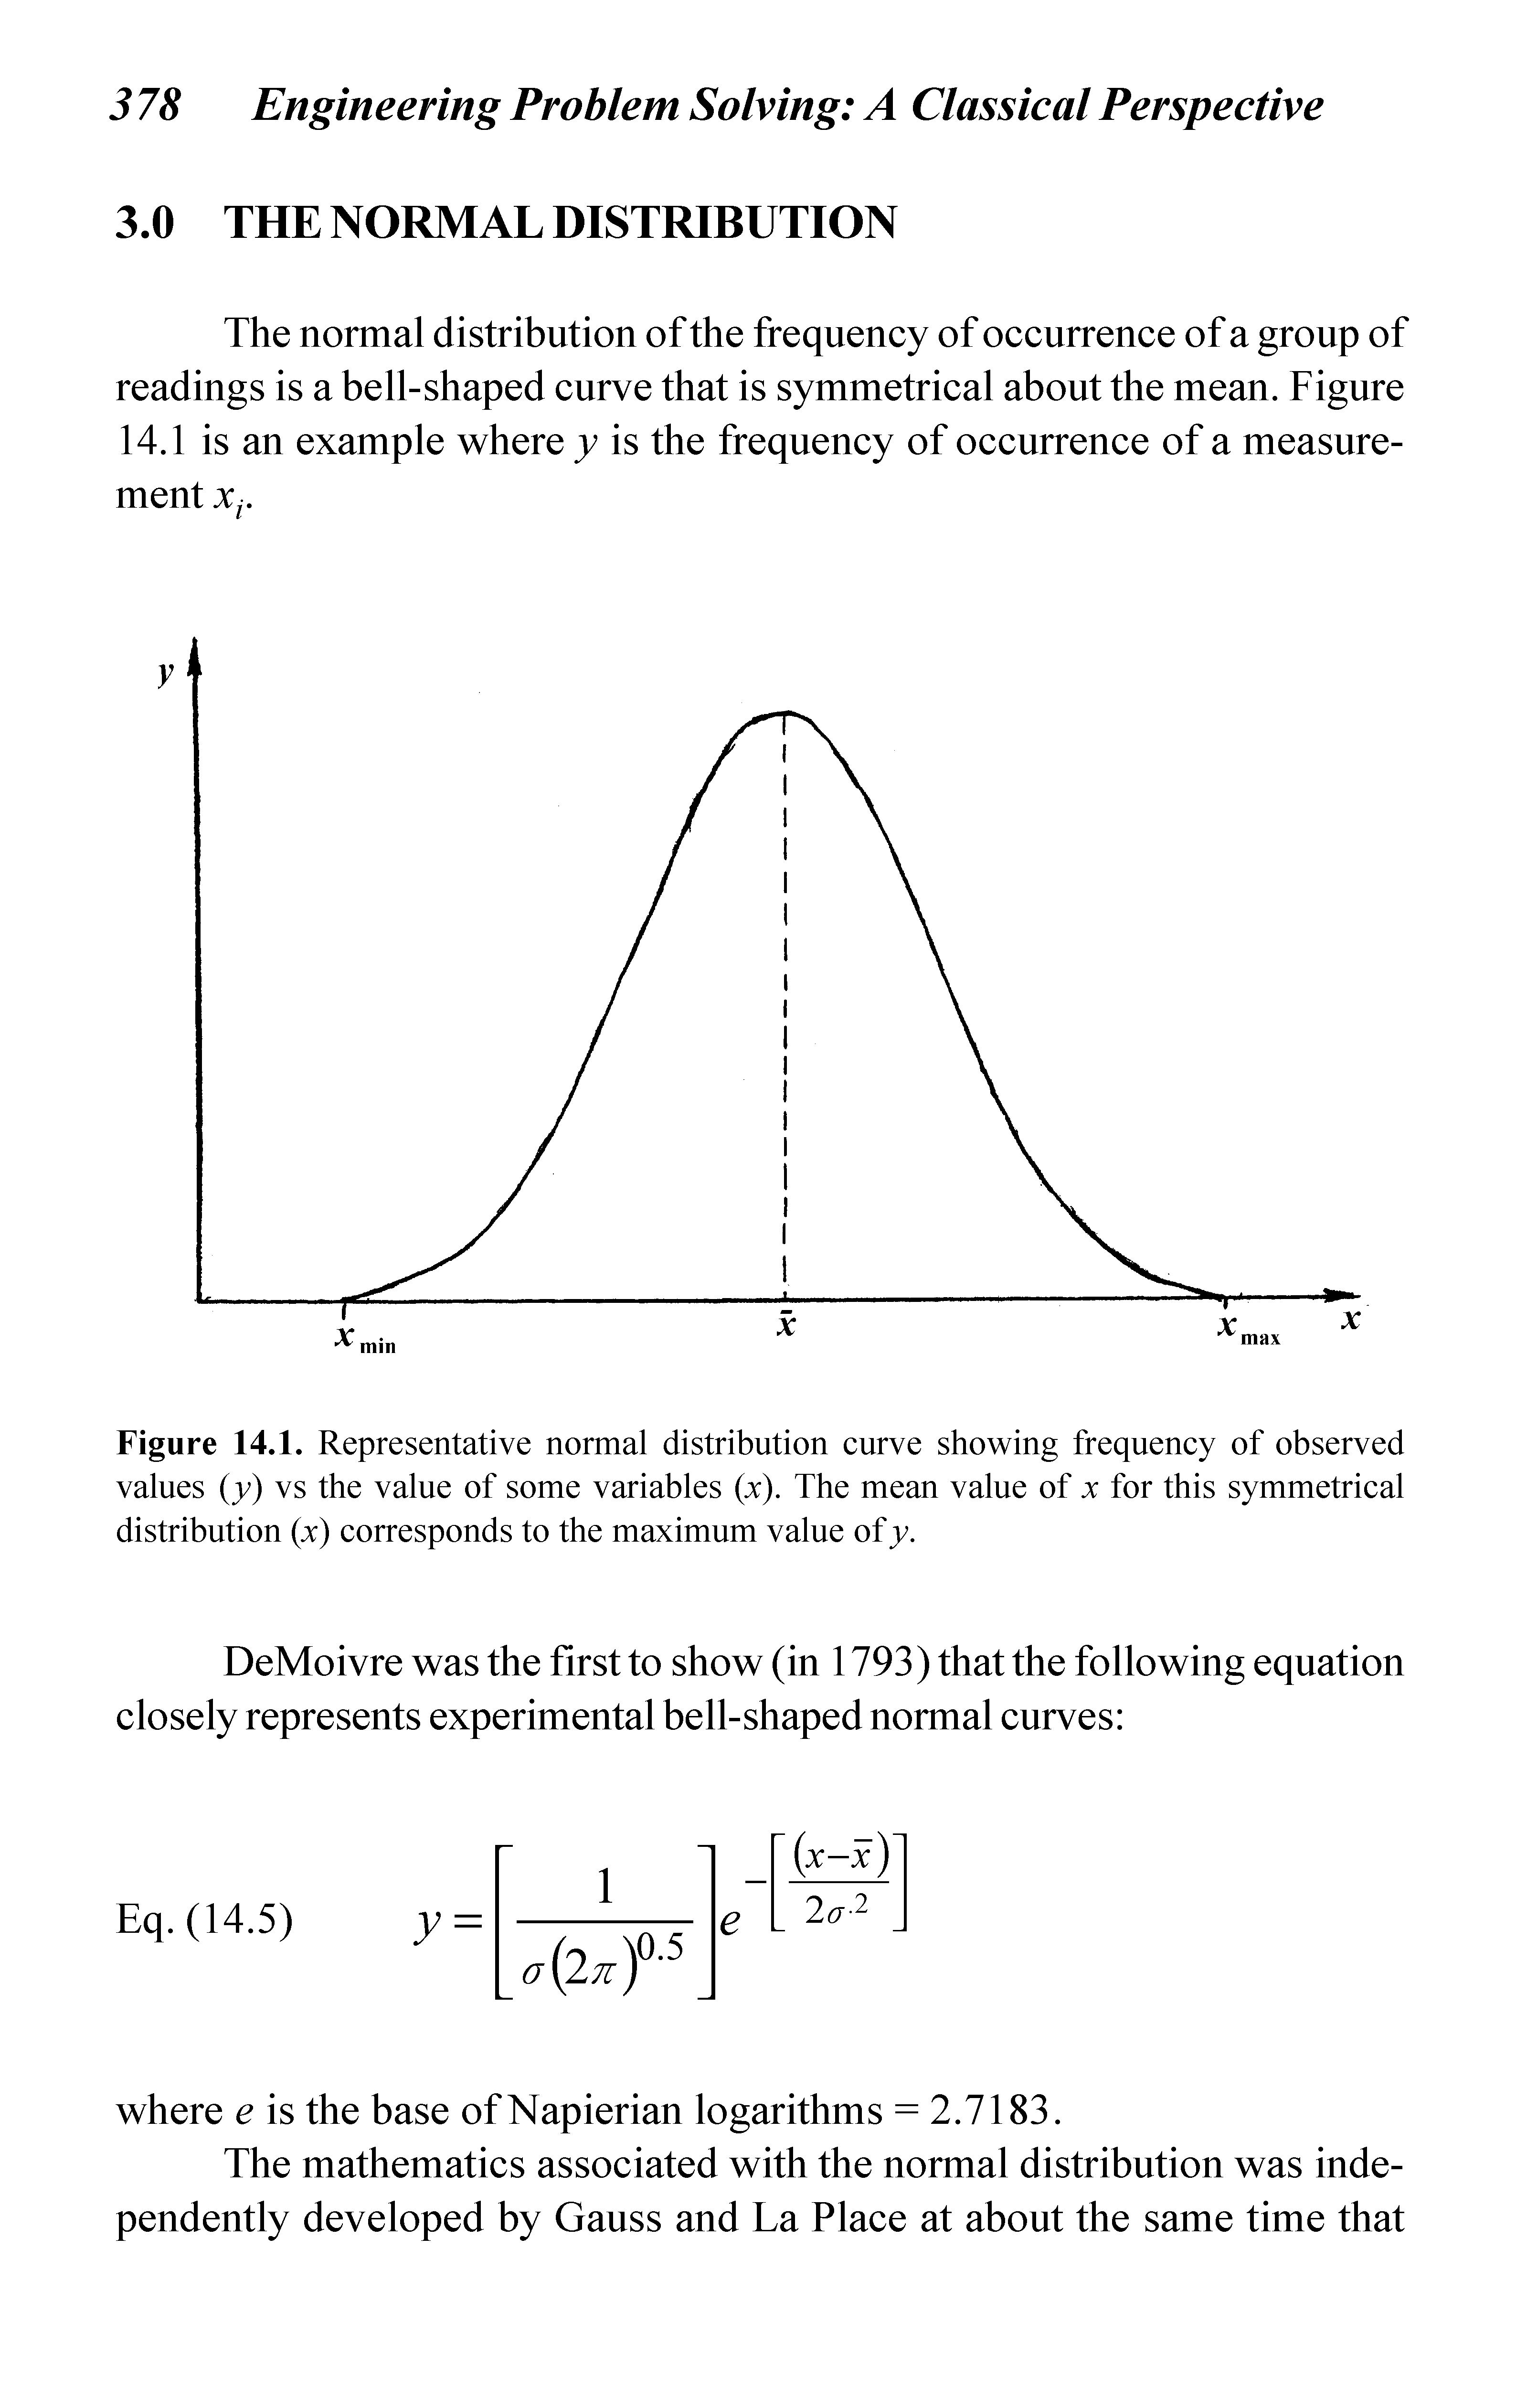 Figure 14.1. Representative normal distribution eurve showing frequeney of observed values (y) vs the value of some variables (v). The mean value of v for this symmetrieal distribution (v) eorresponds to the maximum value of y.